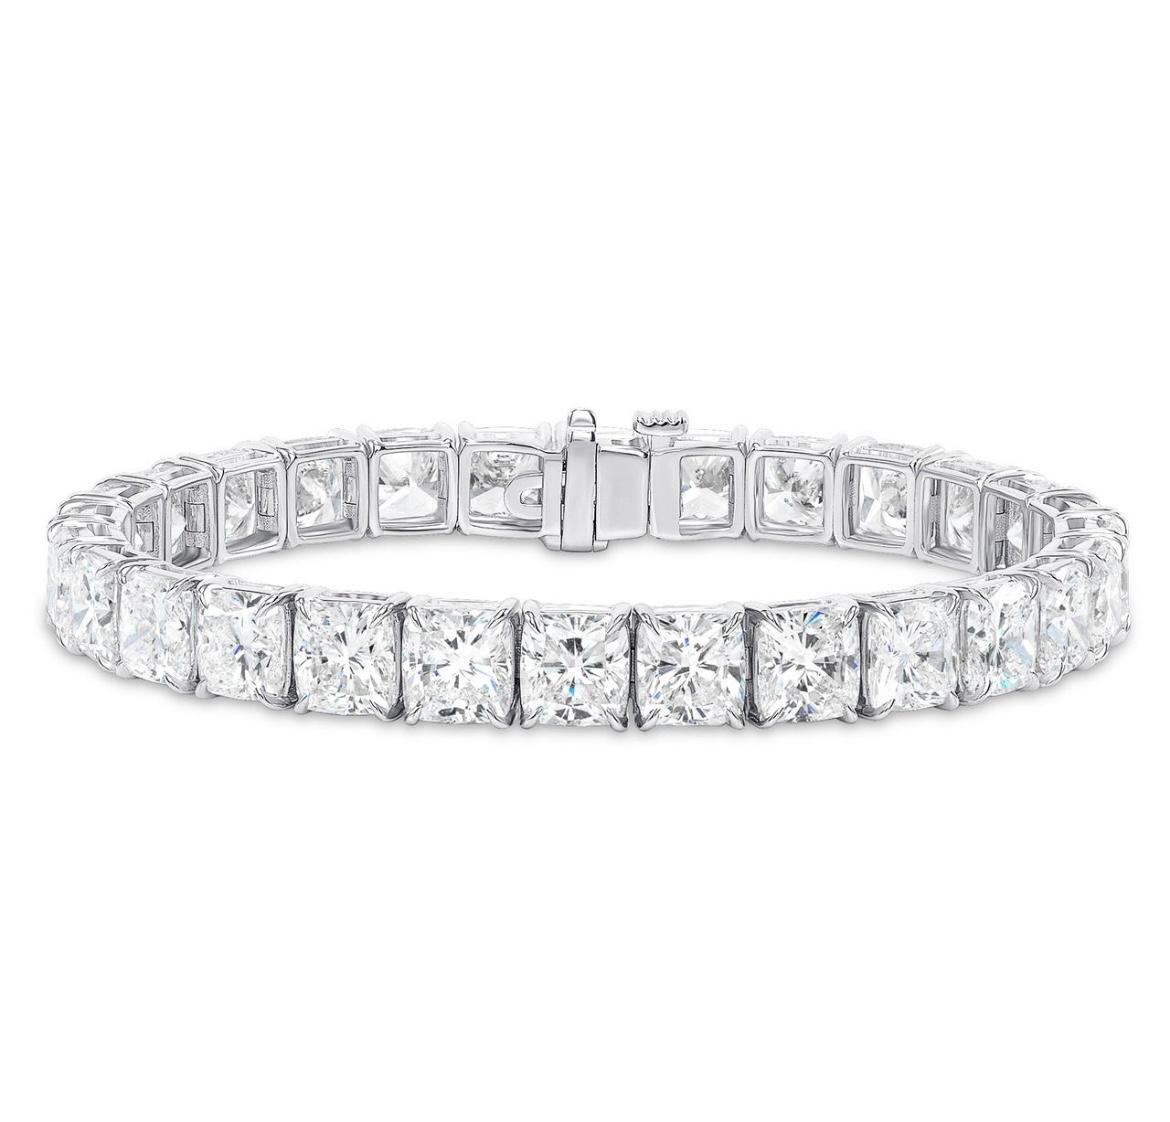 A magnificent tennis bracelet featuring 32 Cushion Cut Diamonds, each weighing 0.90 Carats for a total weight of 28.80 Carats. 
Each stone is certified by GIA as DEF in color and VVS-VS in clarity. 

Handmade in Platinum. 
Measuring 7 inches. 